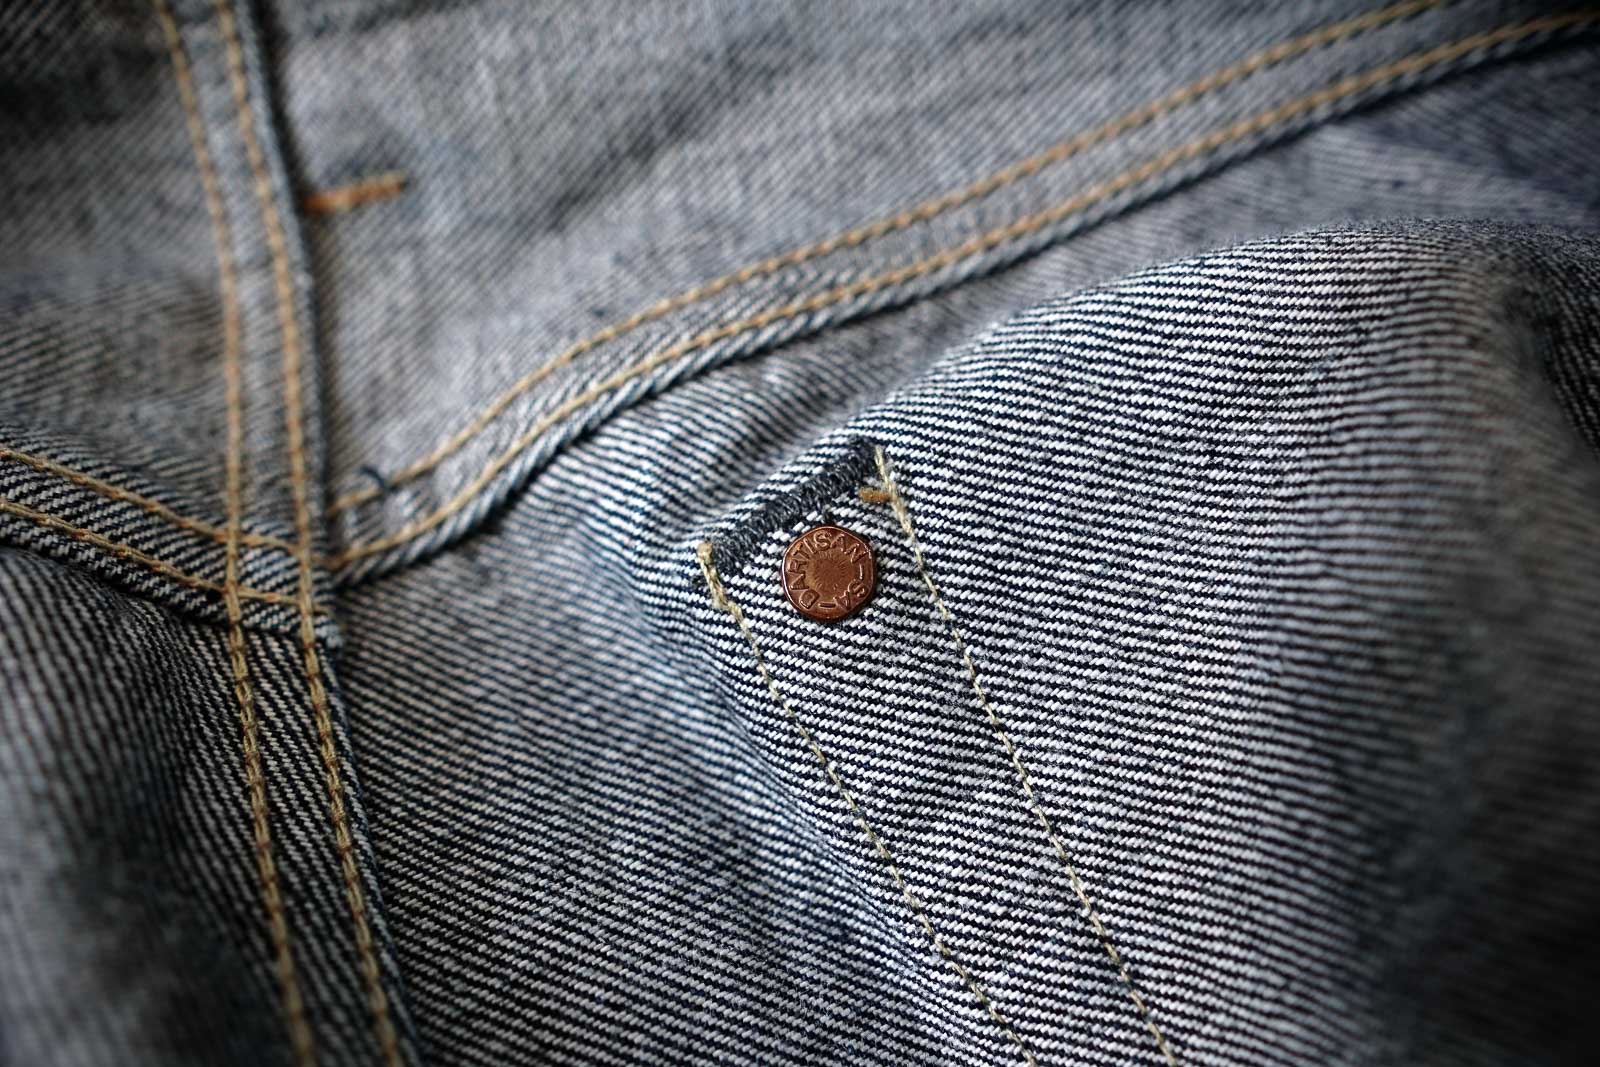 jeans without rivets